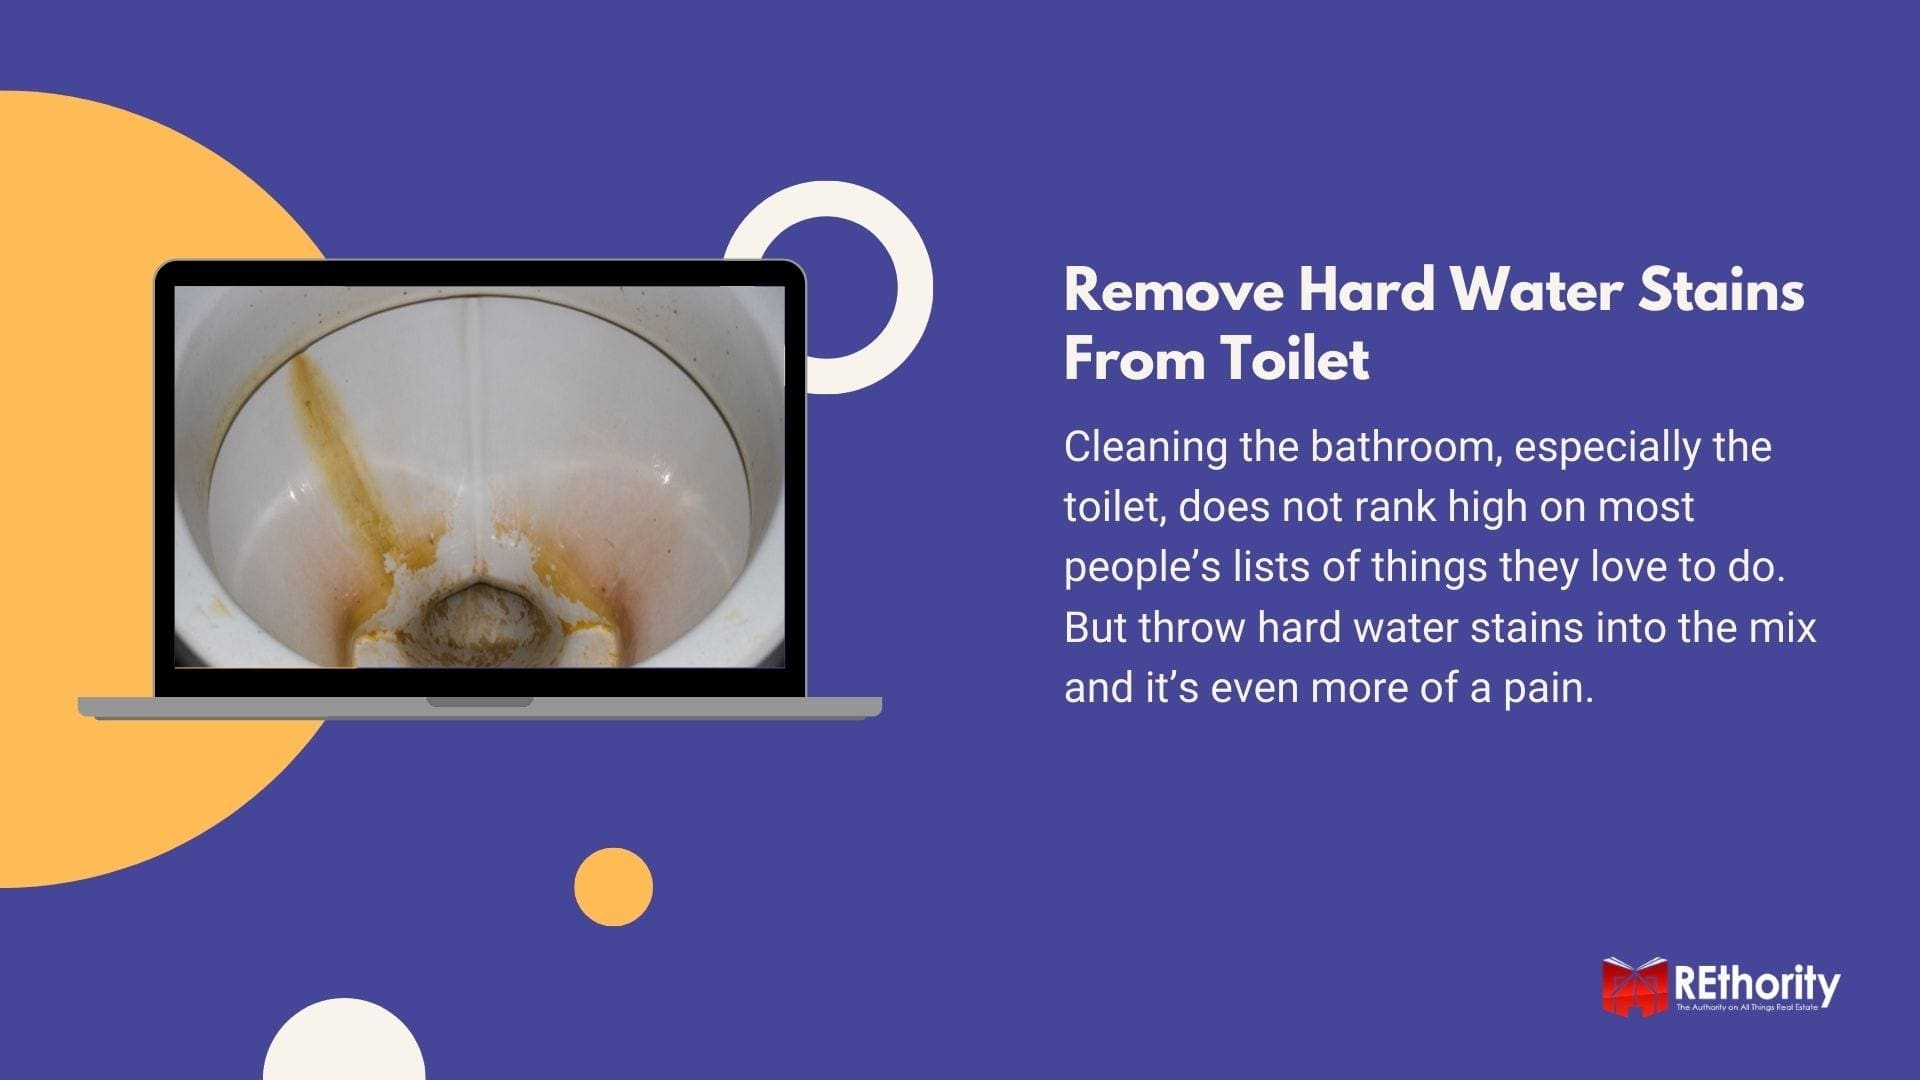 How to remove hard water stains from a toilet graphic displayed on a laptop next to an article summary